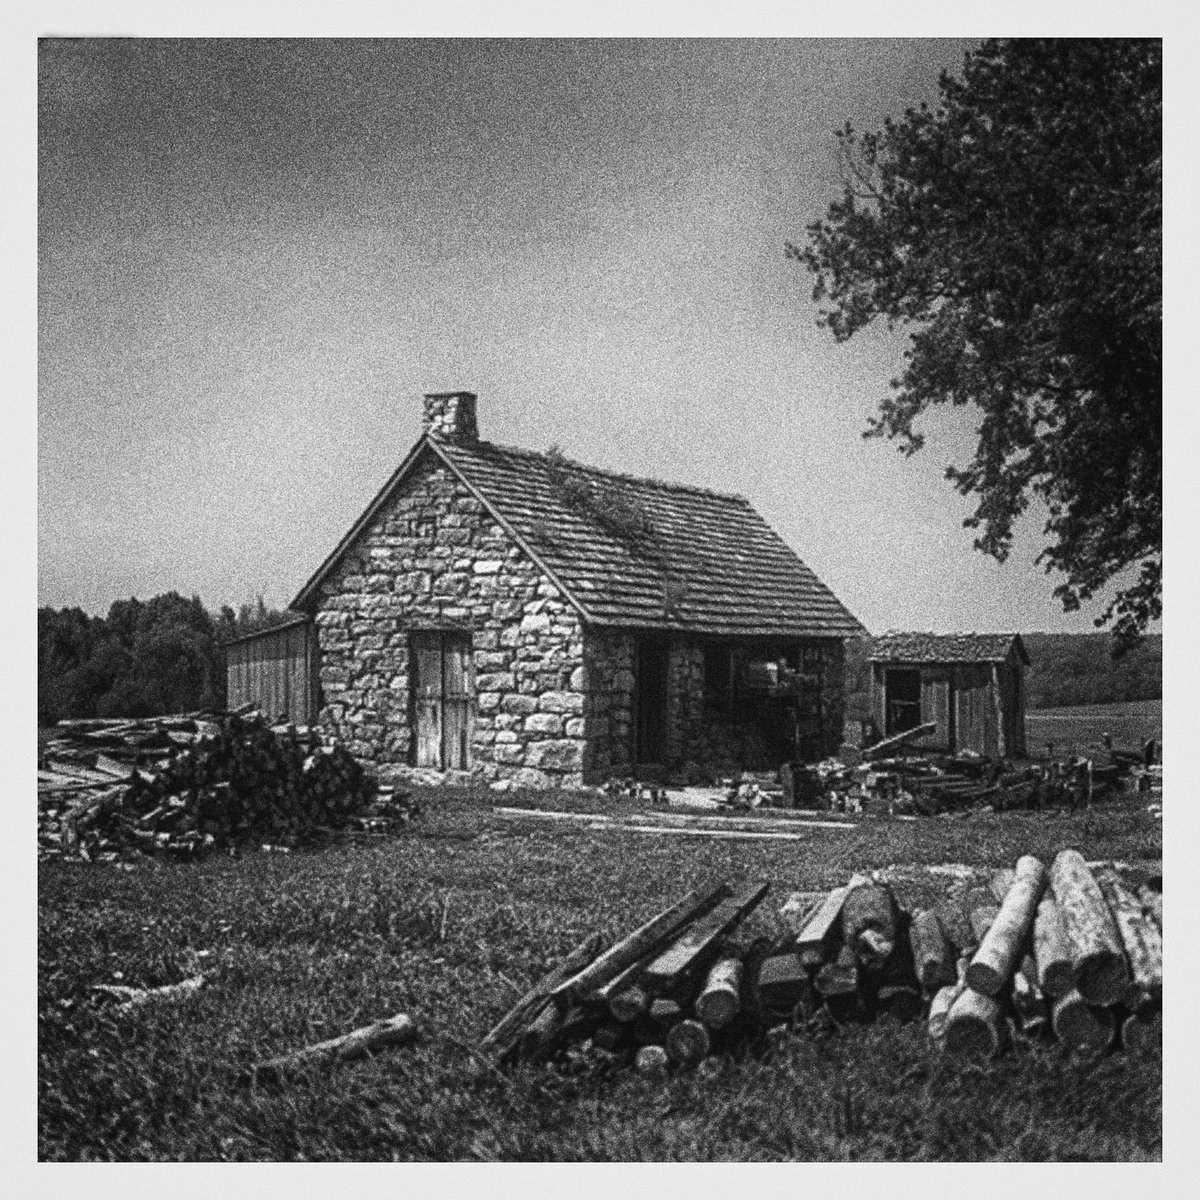 The Old Sawmill
#bnw #bnwphotography #blackandwhite #blackandwhitephotography #monochrome #126film #vintage #lomography #filmcamera #126camera